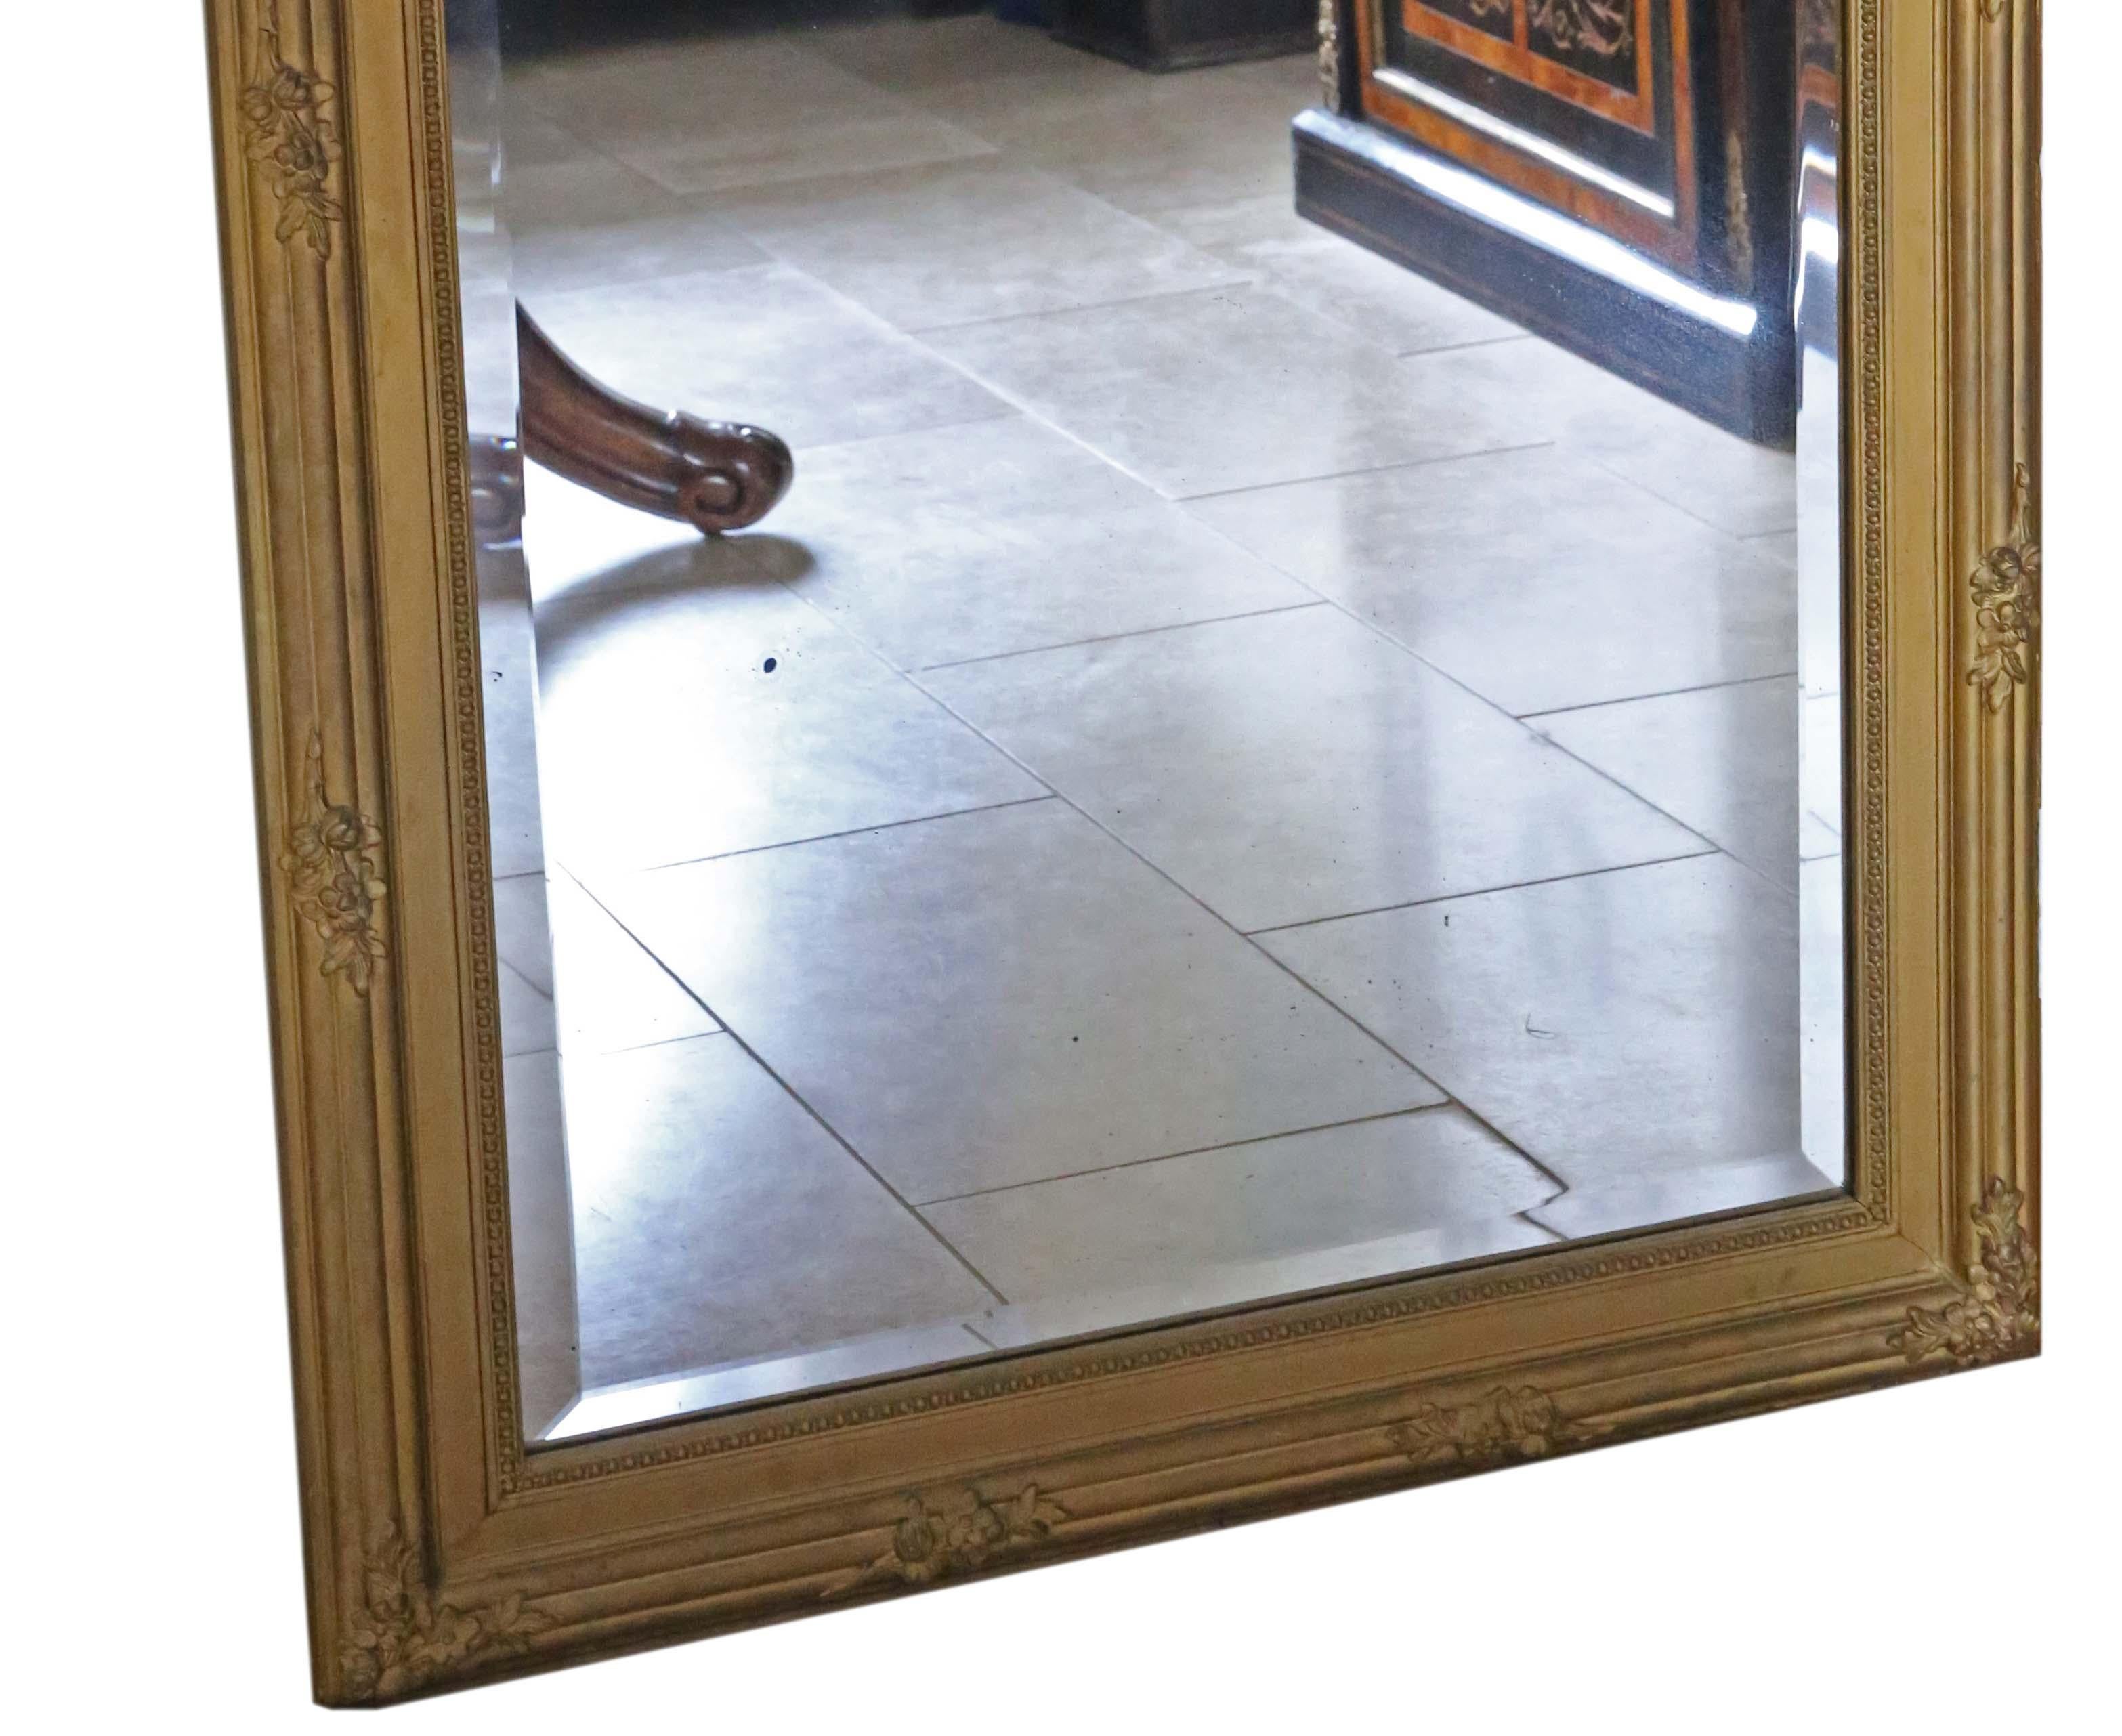 Early 20th Century Antique C1900 Large Quality Gilt Floor Wall Overmantle Trumeau Mirror For Sale